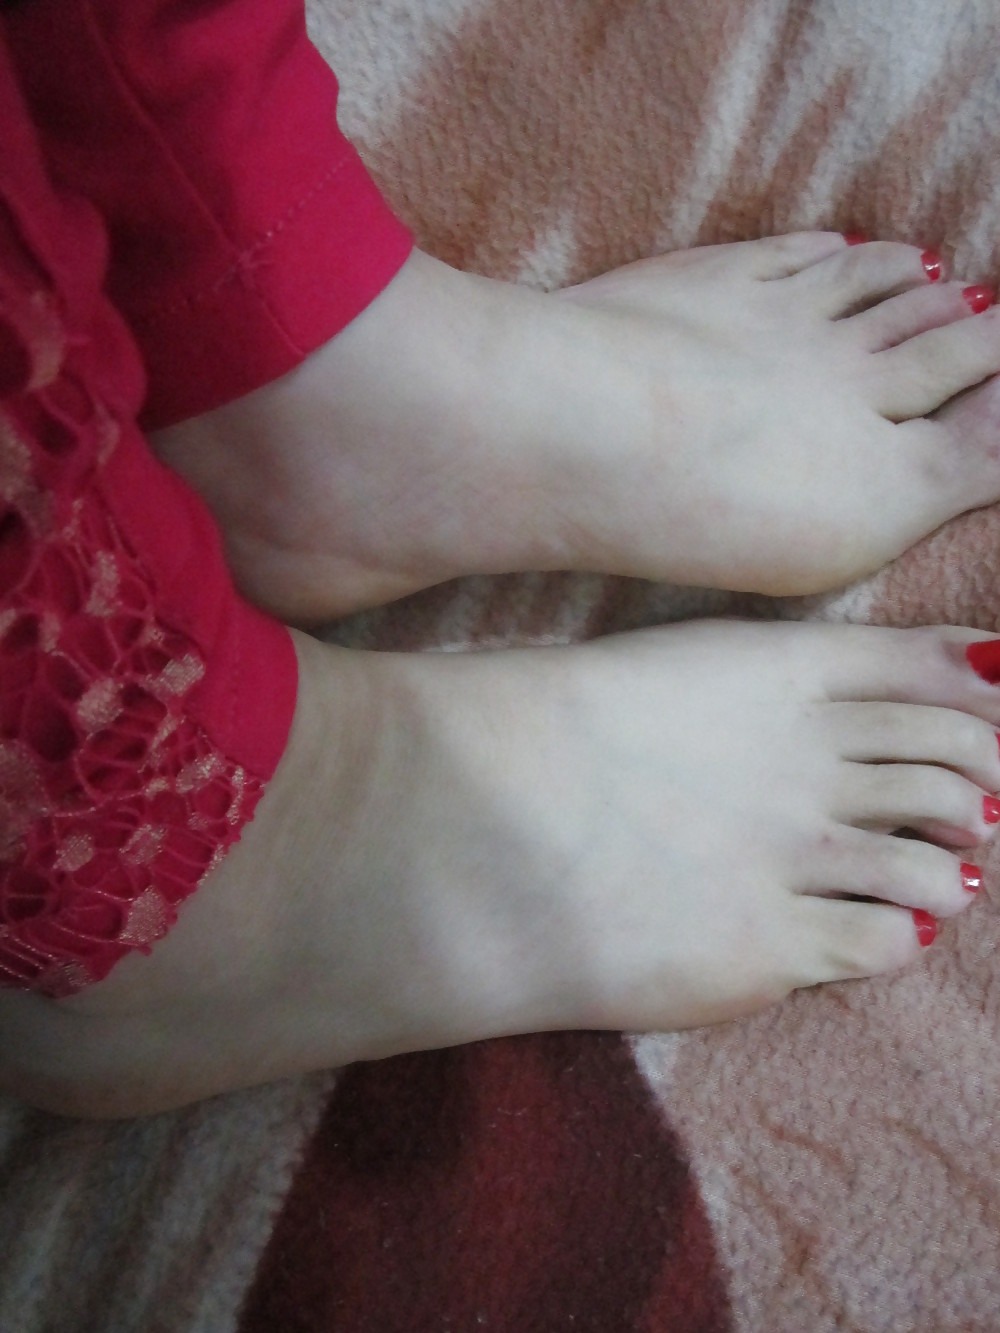 Sex (1) My asian GF's feet, toes and soles! Chinese foot fetish! image